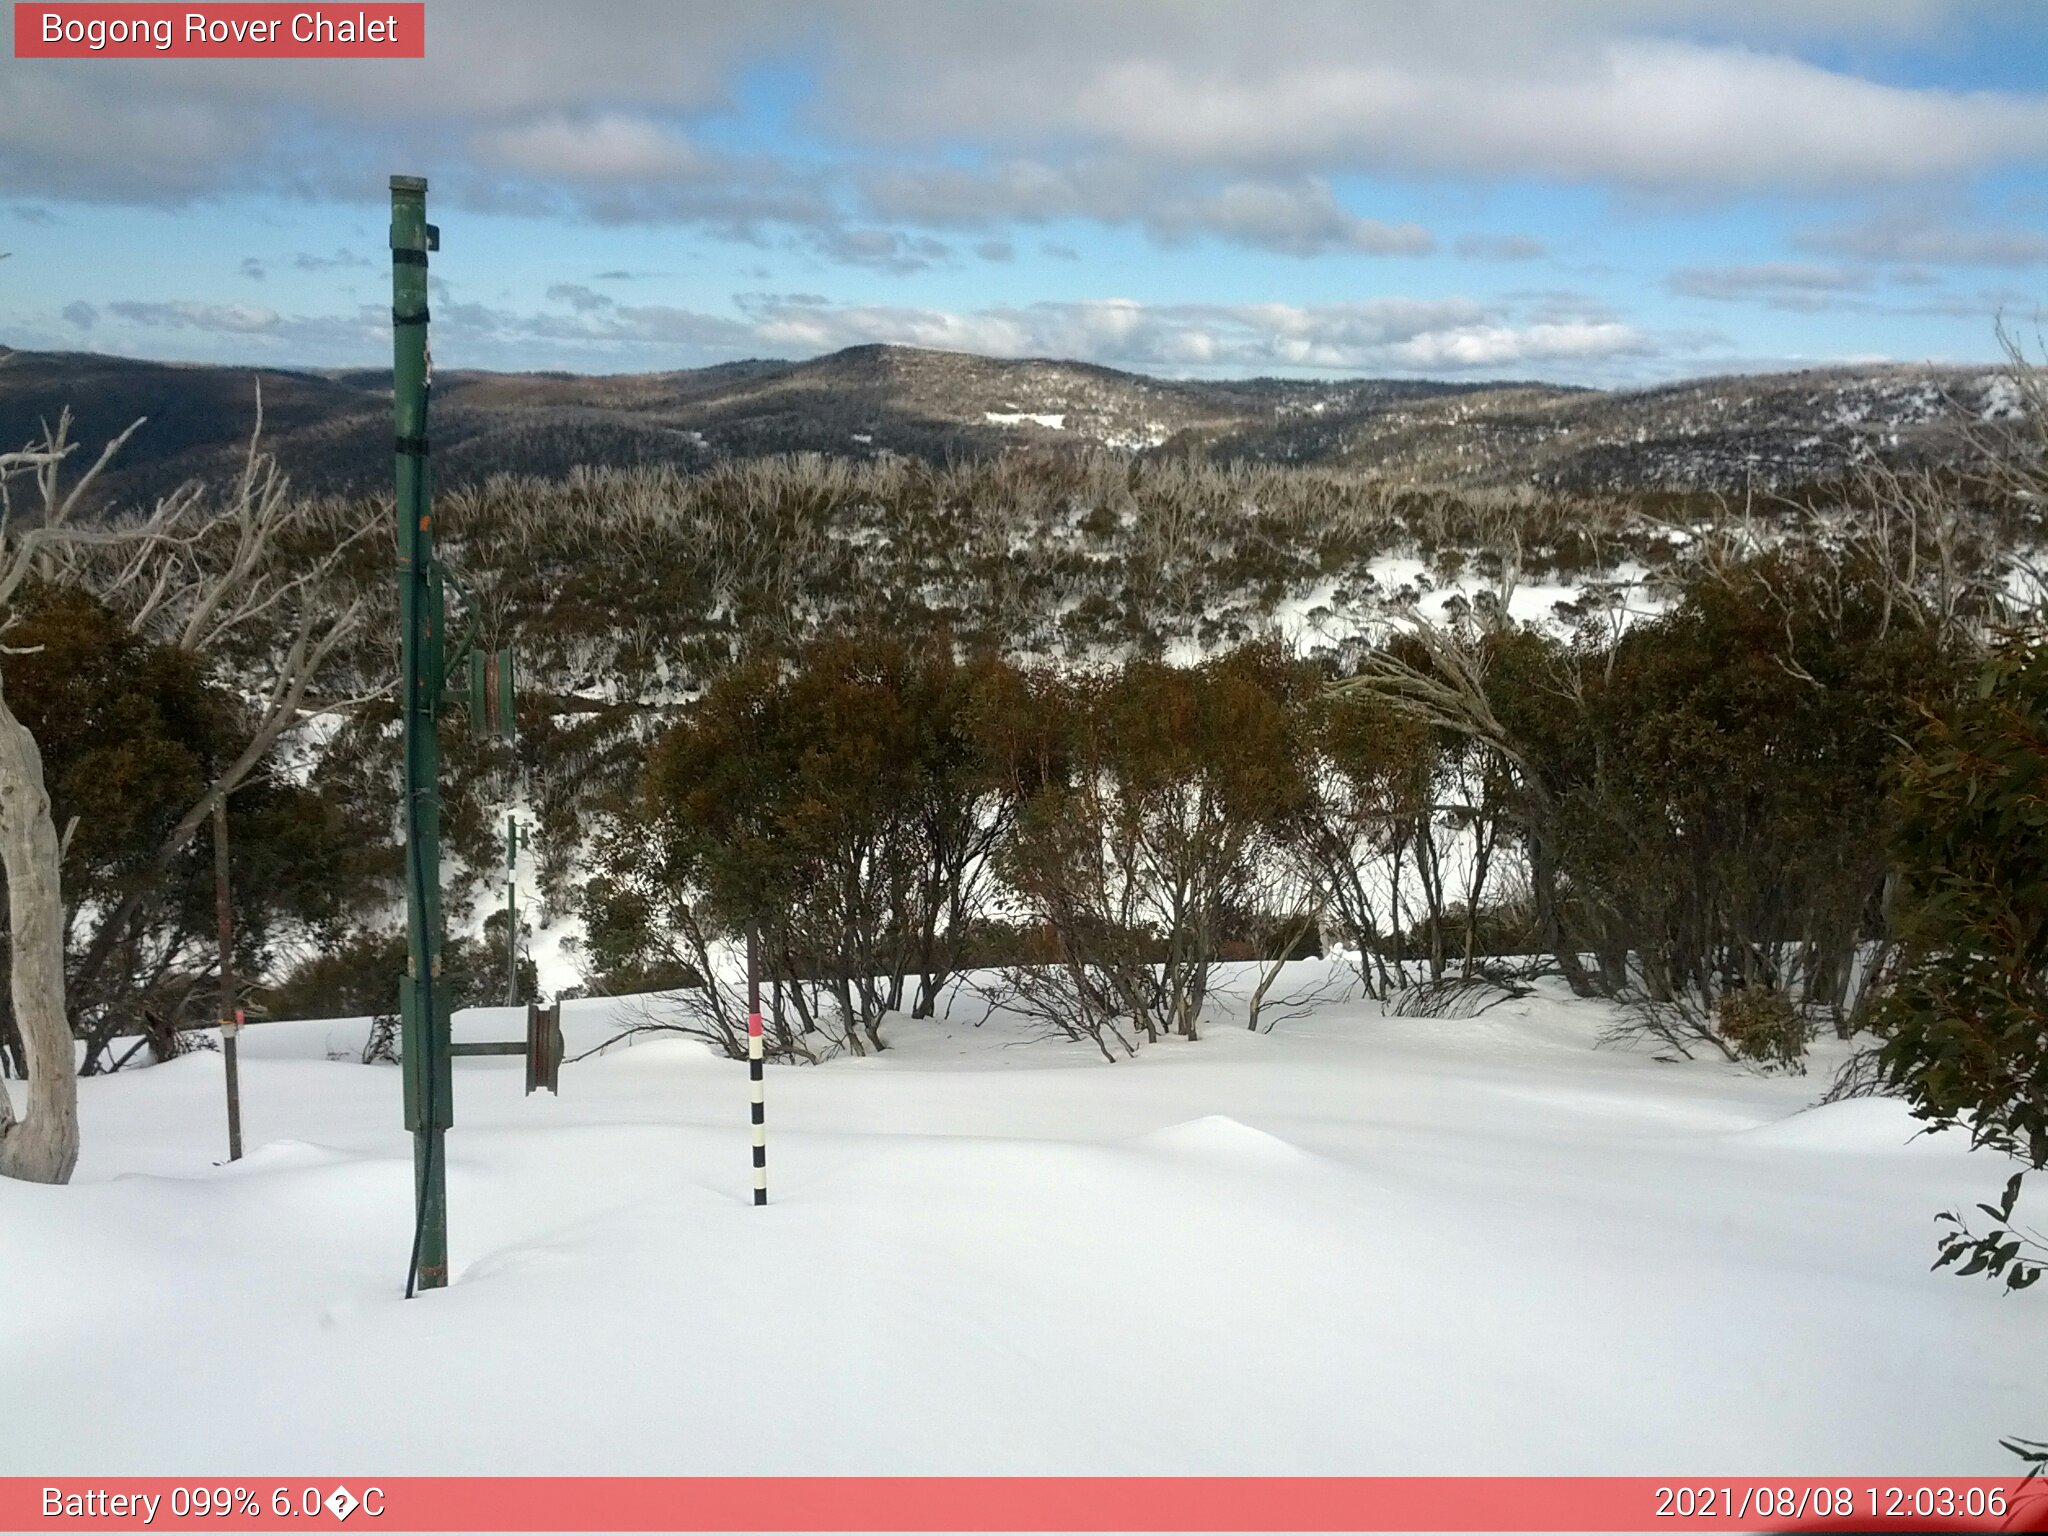 Bogong Web Cam 12:03pm Sunday 8th of August 2021